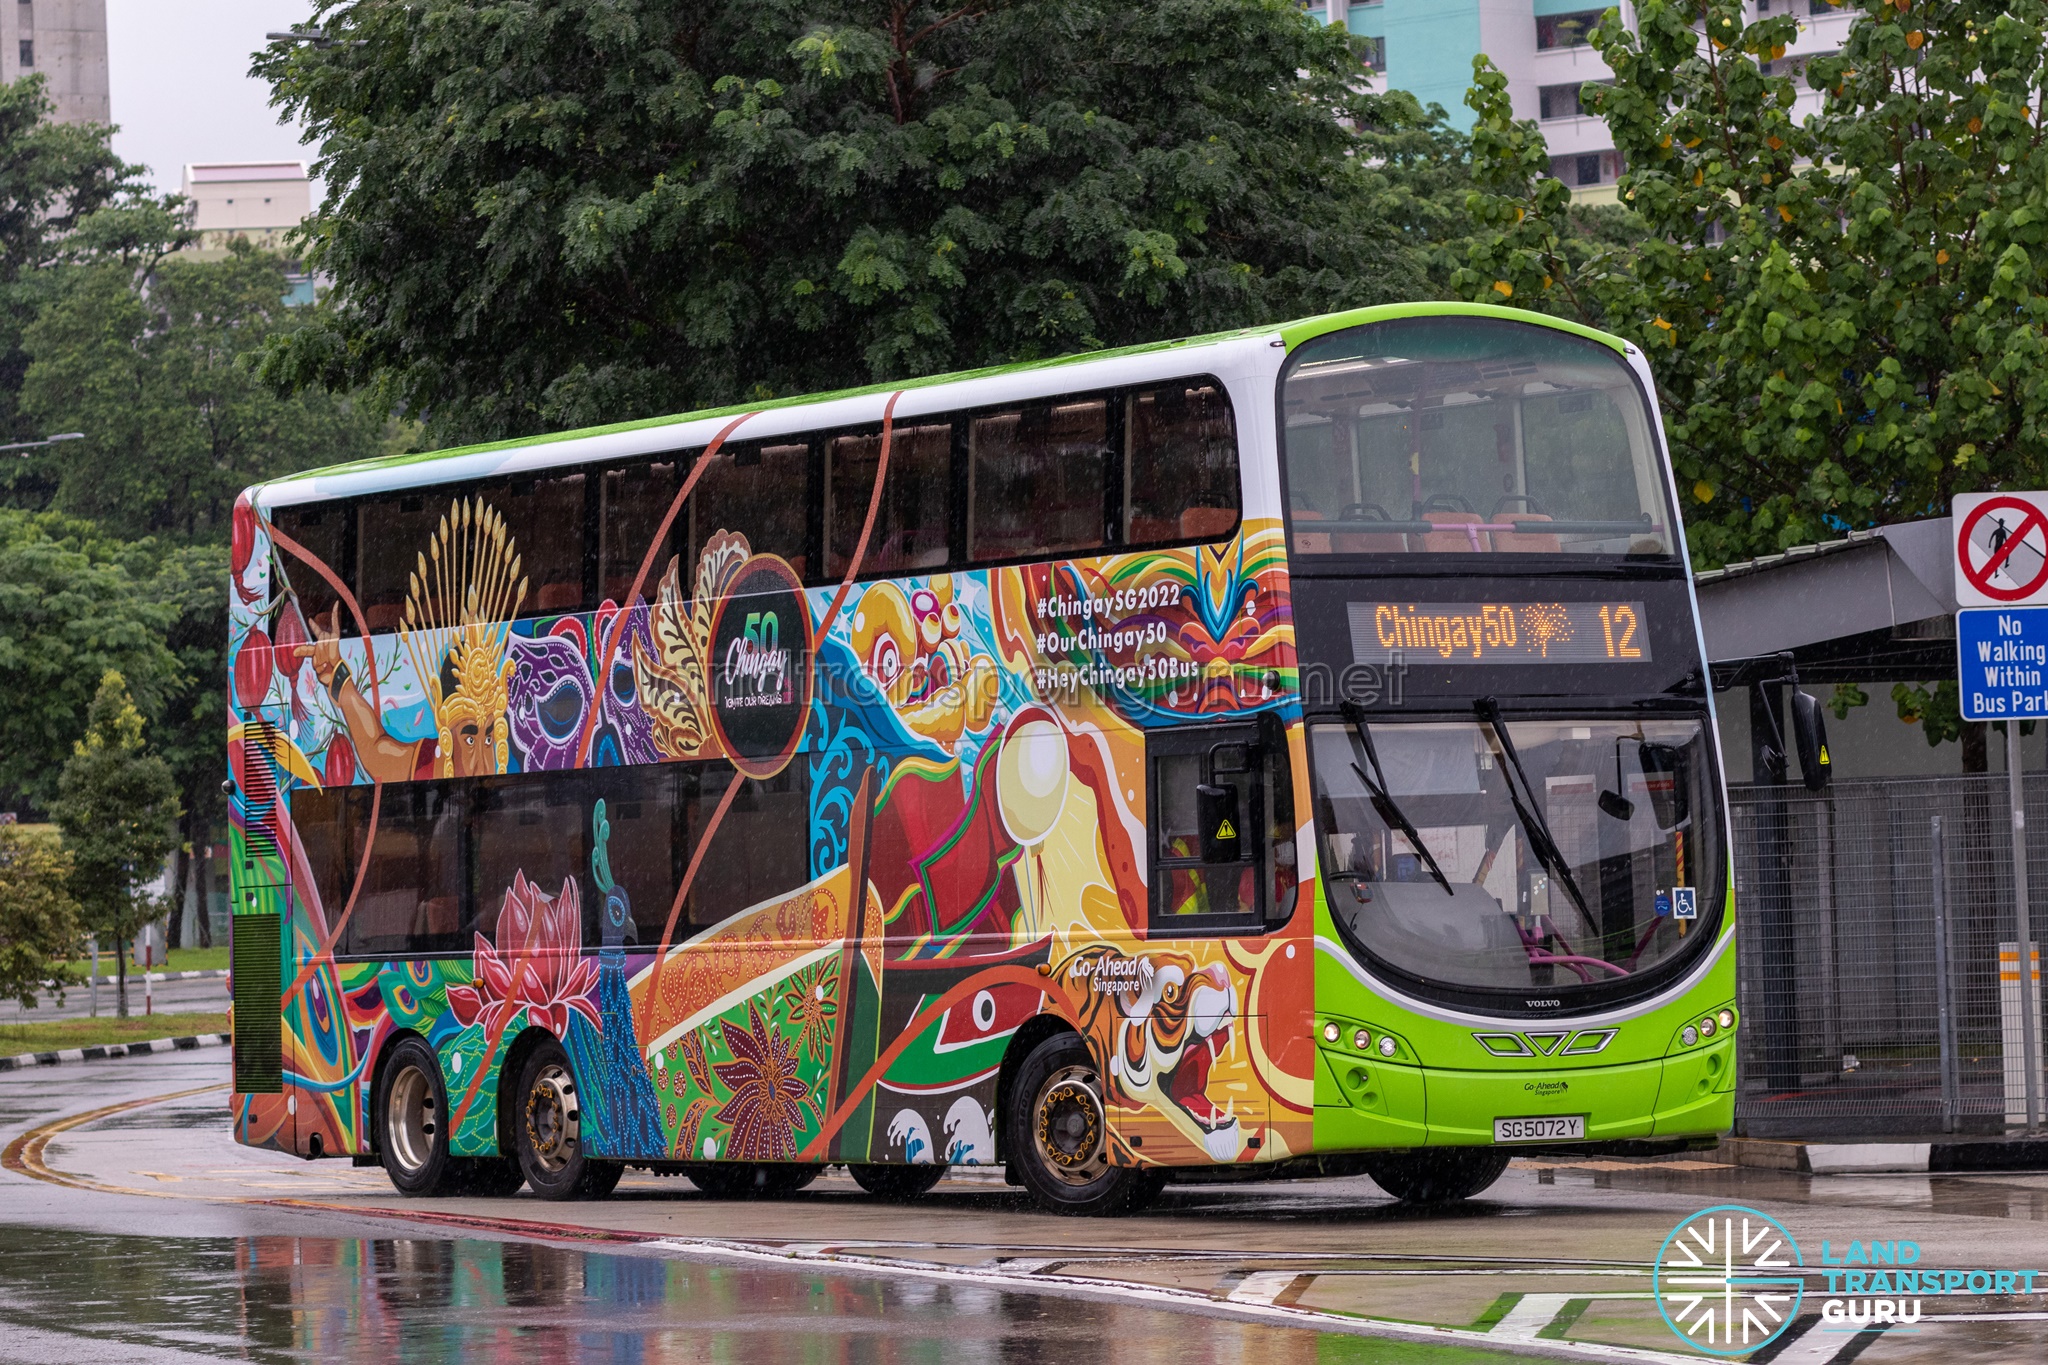 Chingay50 Bus Advertising Campaign (2022)